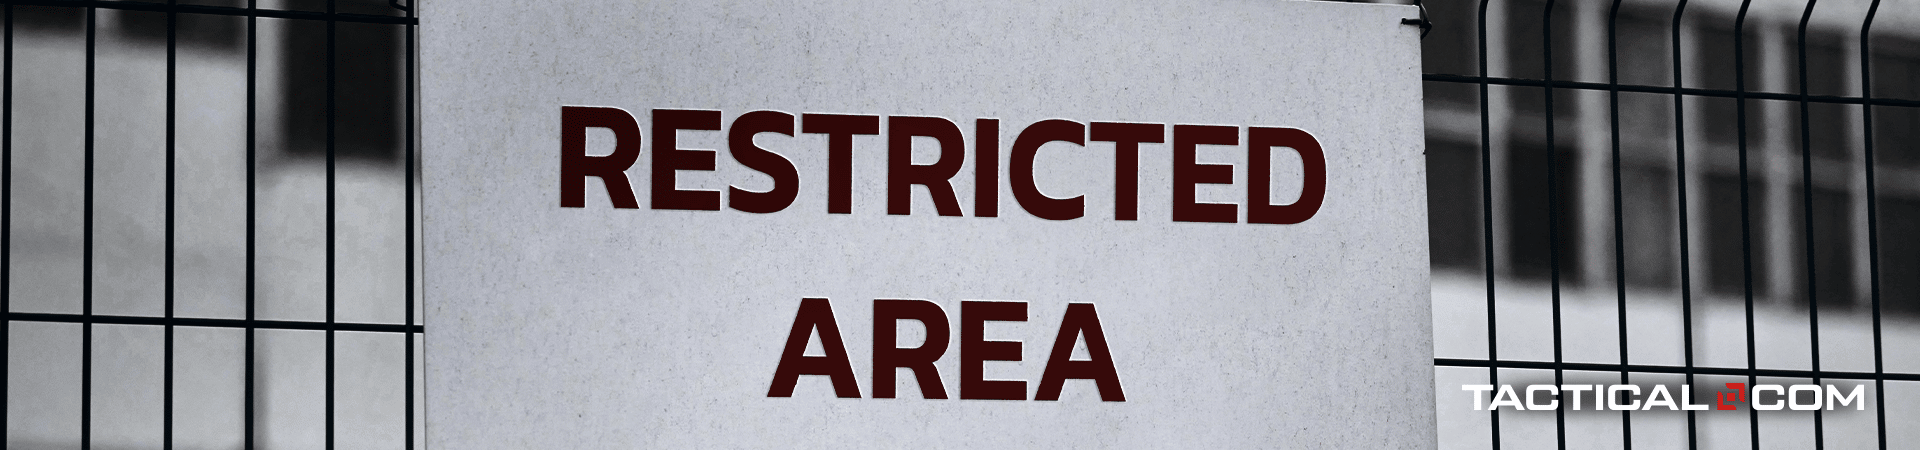 having a foreboding sign that indicates a restricted area is one way to fortify your home